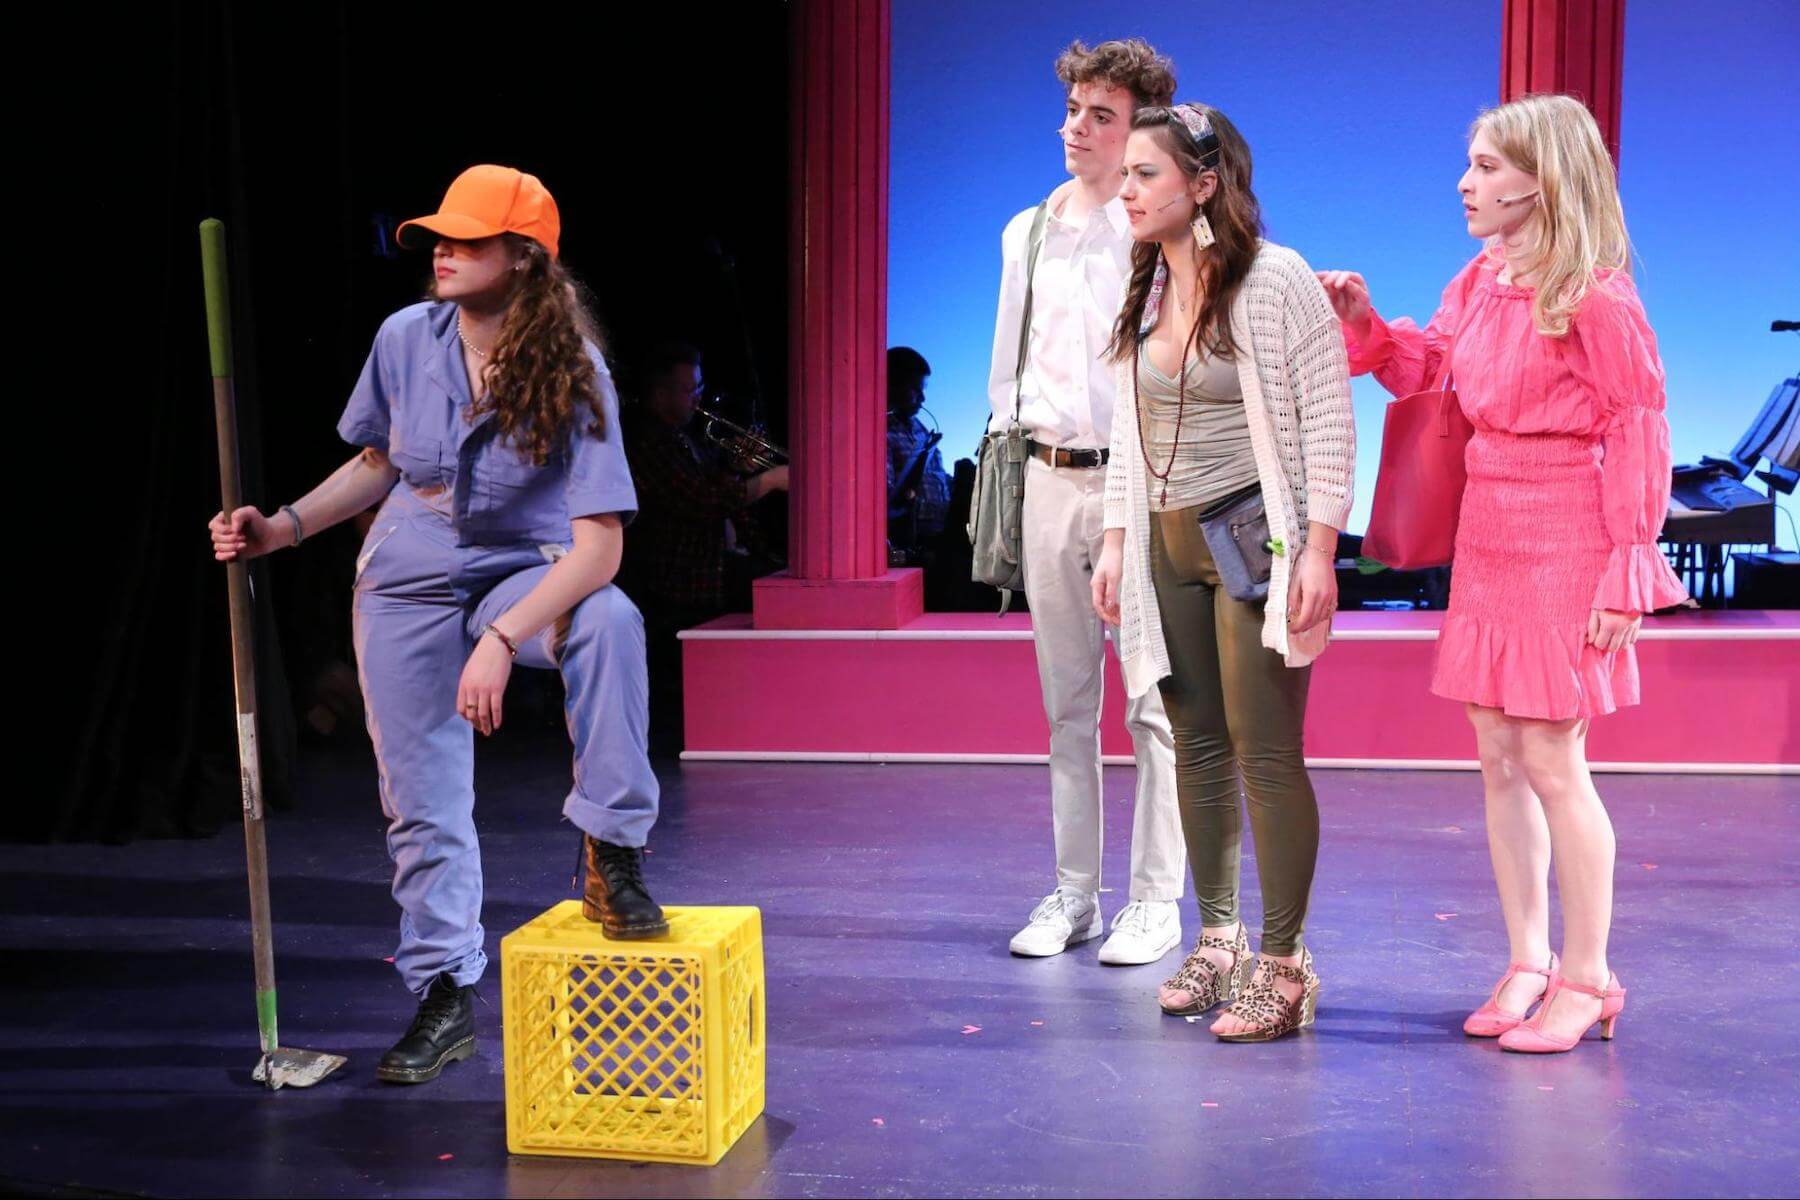 Four Ethical Culture Fieldston Upper School students perform onstage together in Legally Blonde.